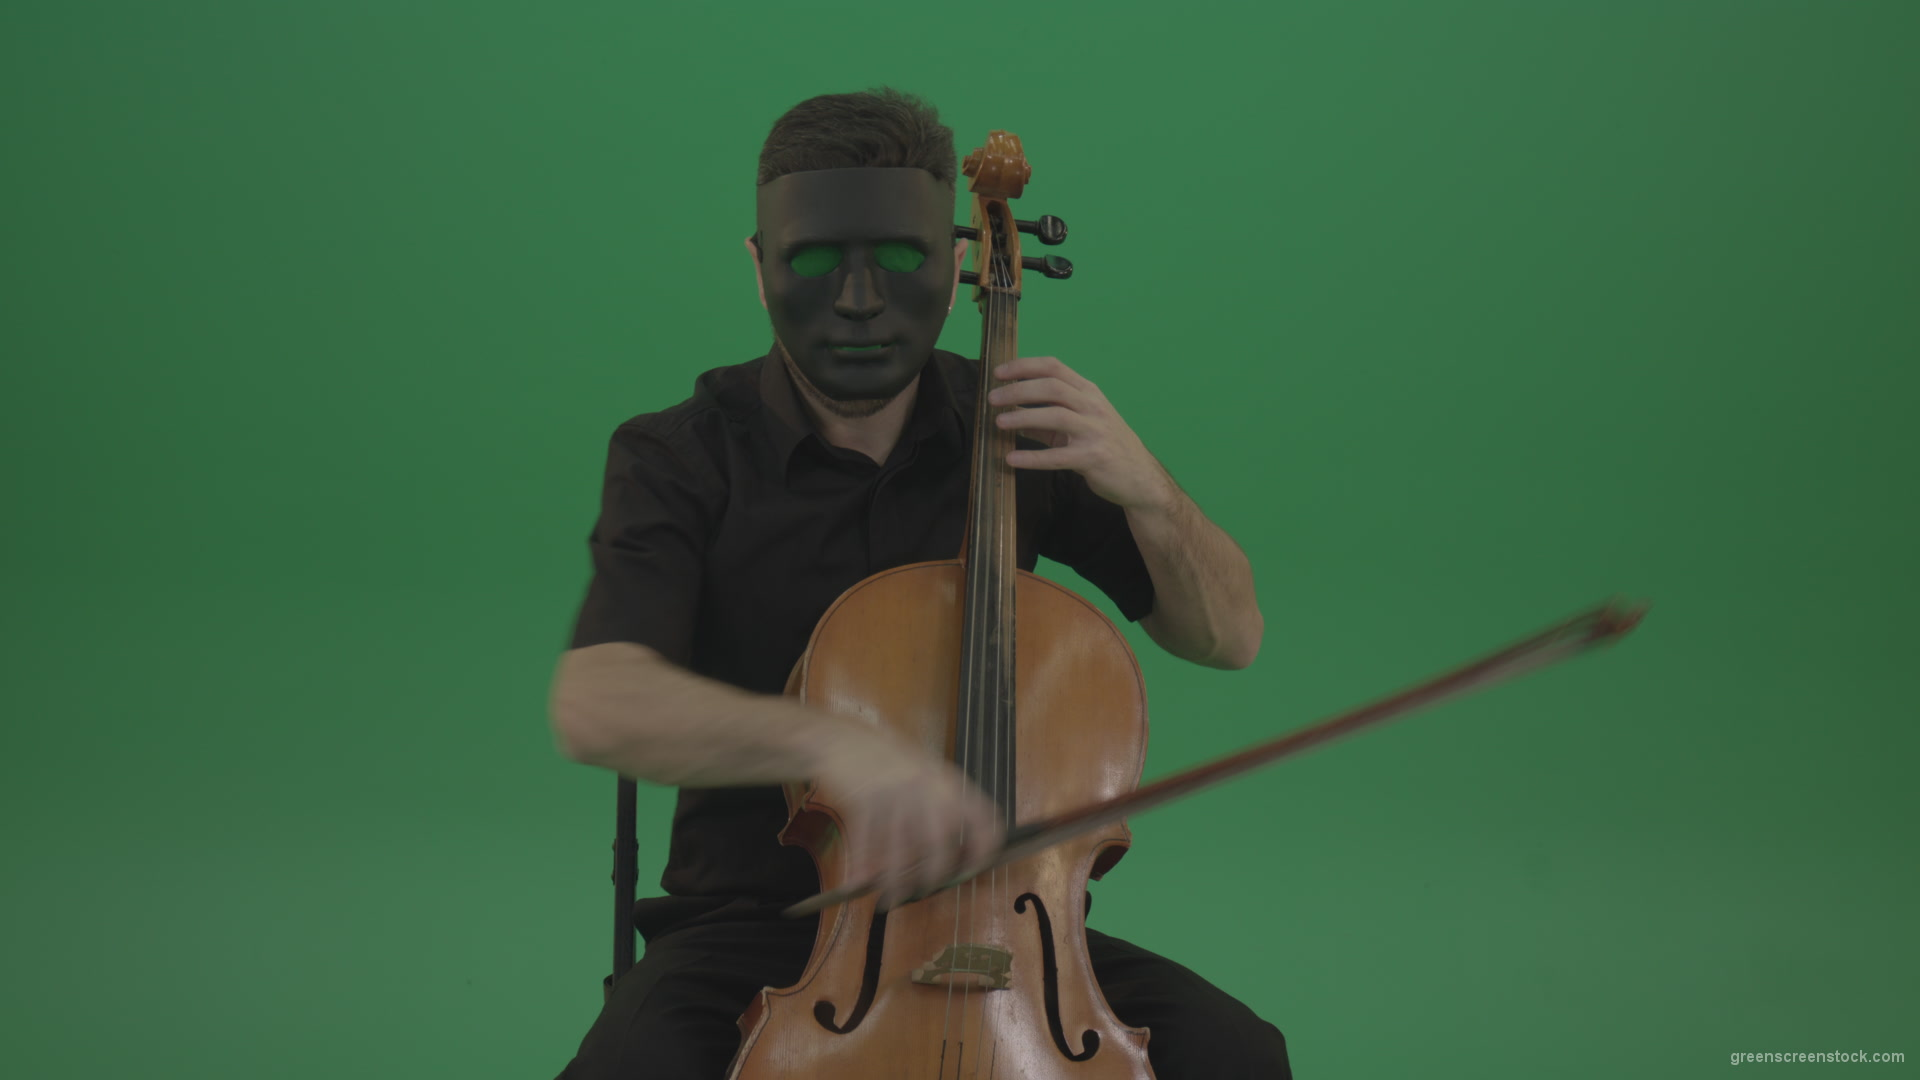 Gothic-Man-in-black-mask-playing-violoncello-cello-strings-music-instrument-isolated-on-green-screen_005 Green Screen Stock